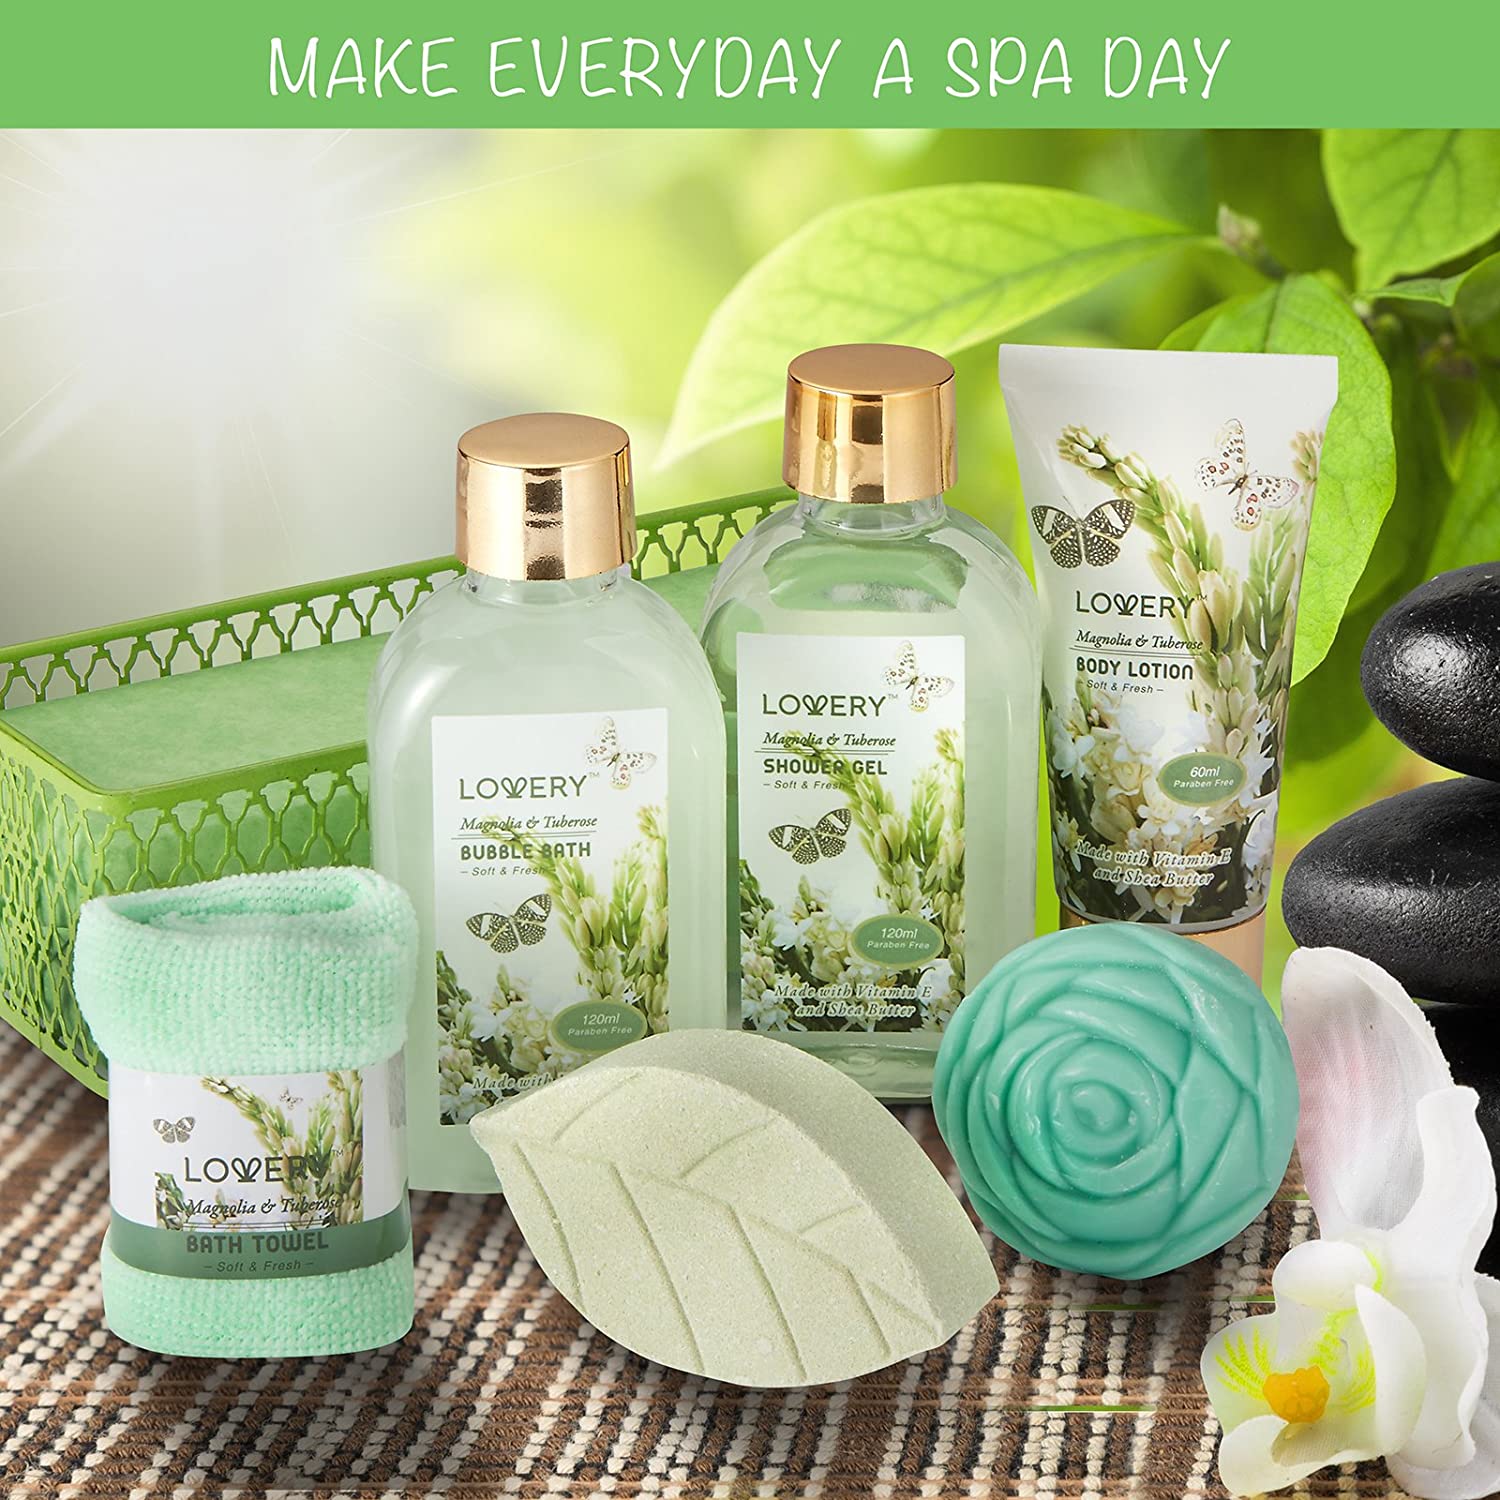 Lovery bath gift set, bath gift set, Magnolia & Tuberose Spa Set, Luxury Body Care Collection, Exquisite Bath Aromas, Soothing Fragrance Essentials, 7-Piece Spa Gift, Travel-Size Spa Kit, Magnolia & Tuberose Beauty, Green Mesh Basket Gift, Paraben-Free Spa Essentials, Cruelty-Free Spa Care